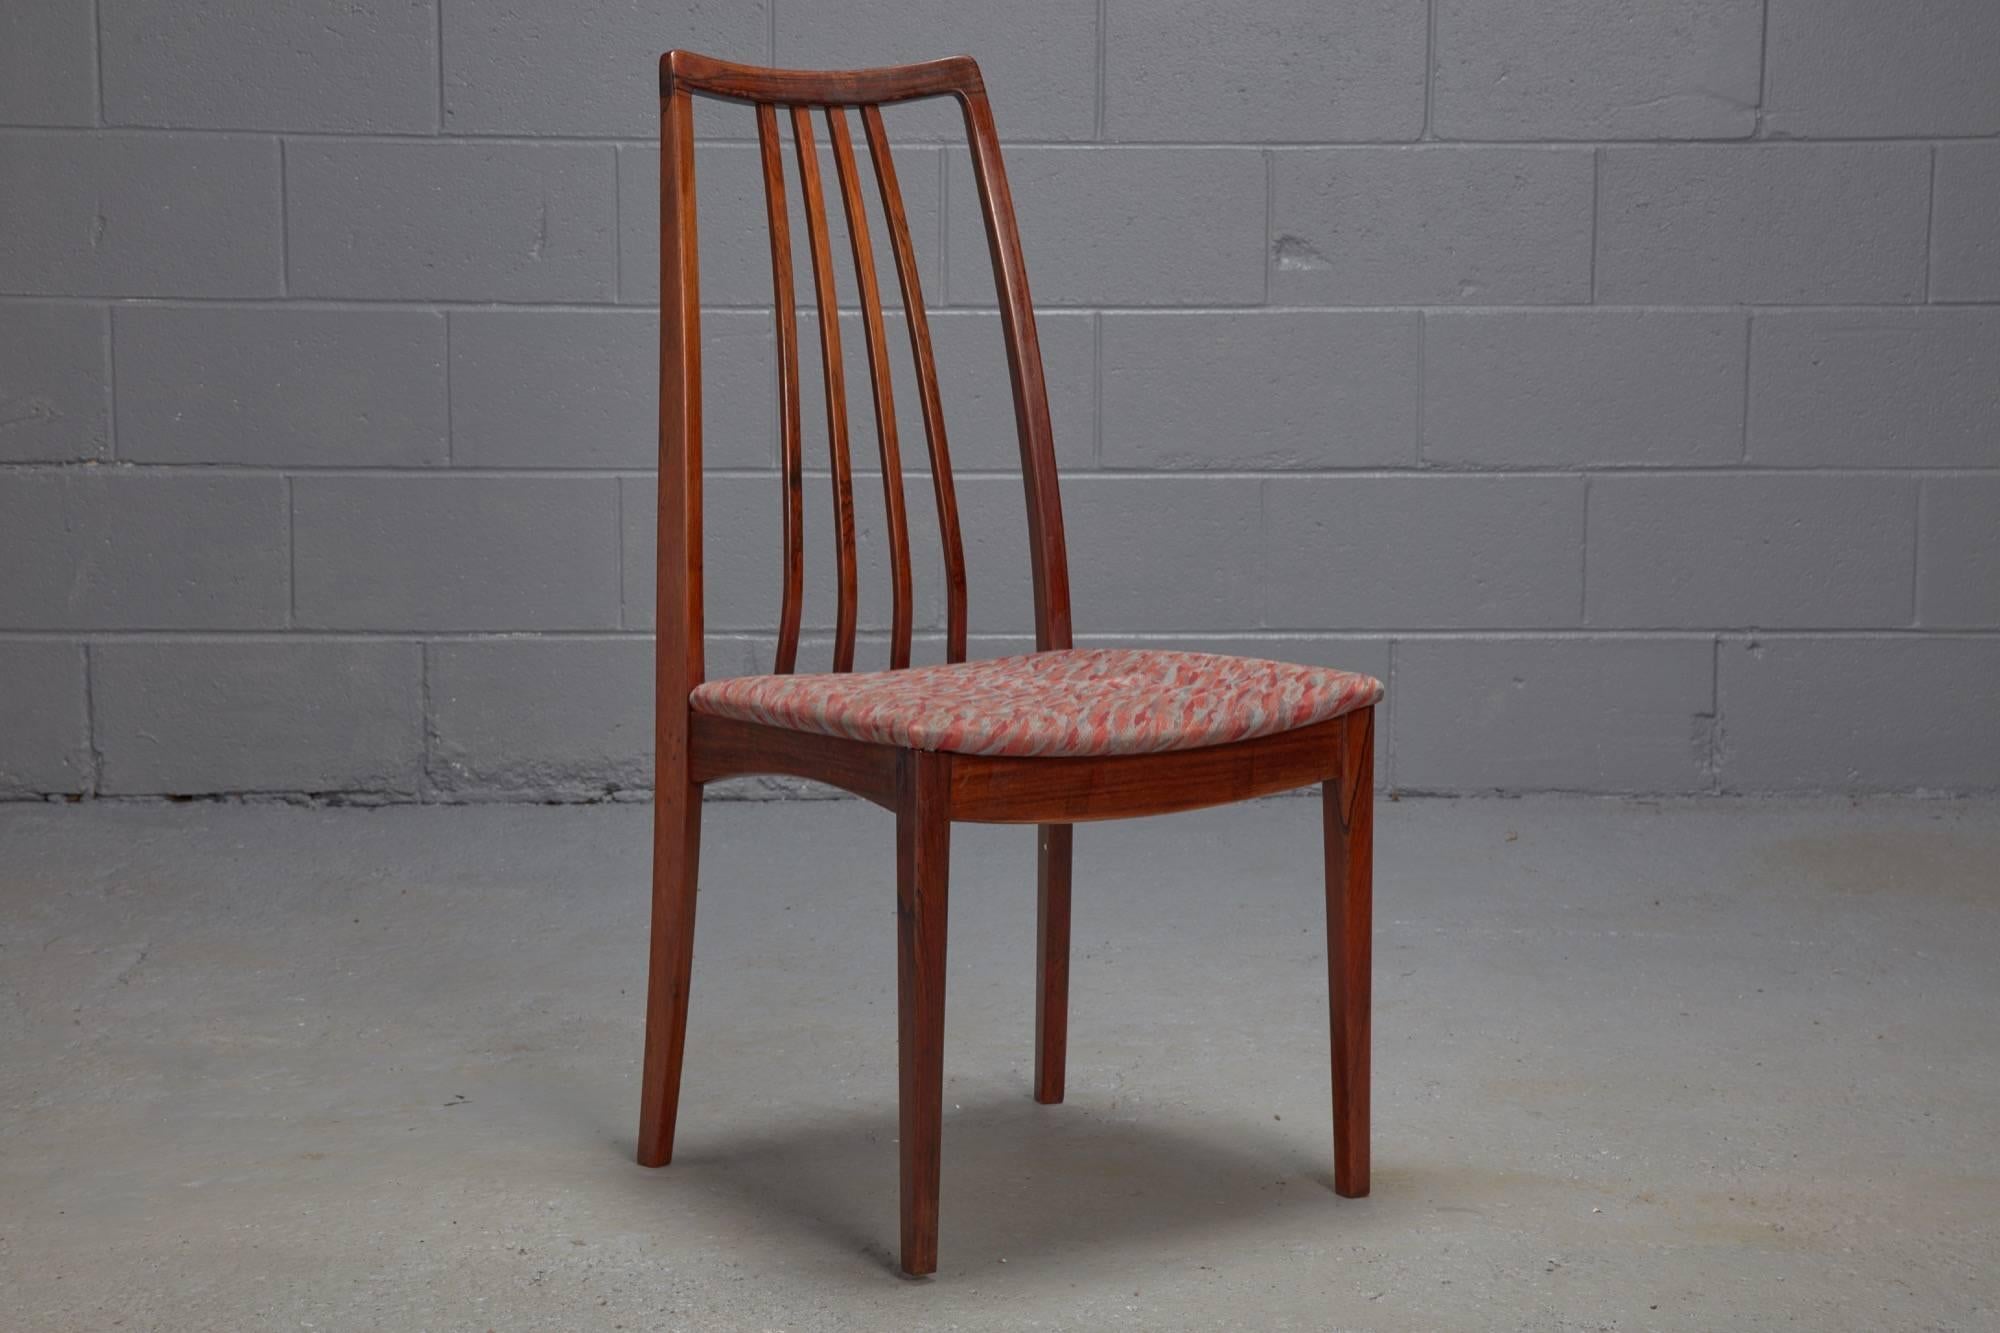 These dining chairs feature an sculptural rosewood frame, an elegant high back with four thin spindles, and patterned upholstery. Sold as a set of four.